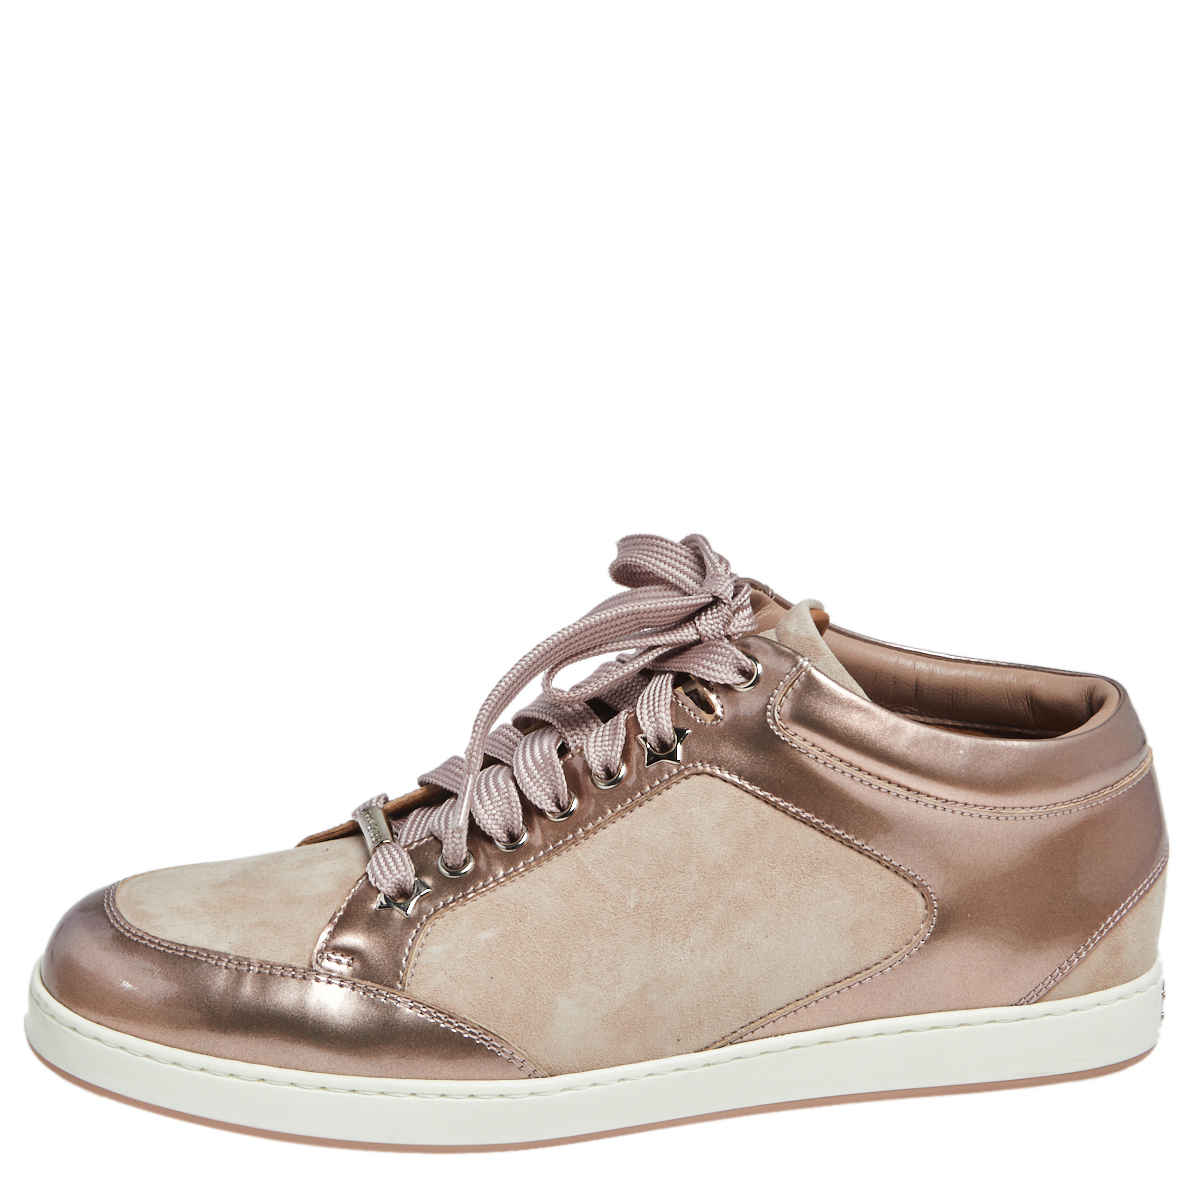 

Jimmy Choo Metallic/Beige Suede And Patent Miami Lace Up Sneakers Size